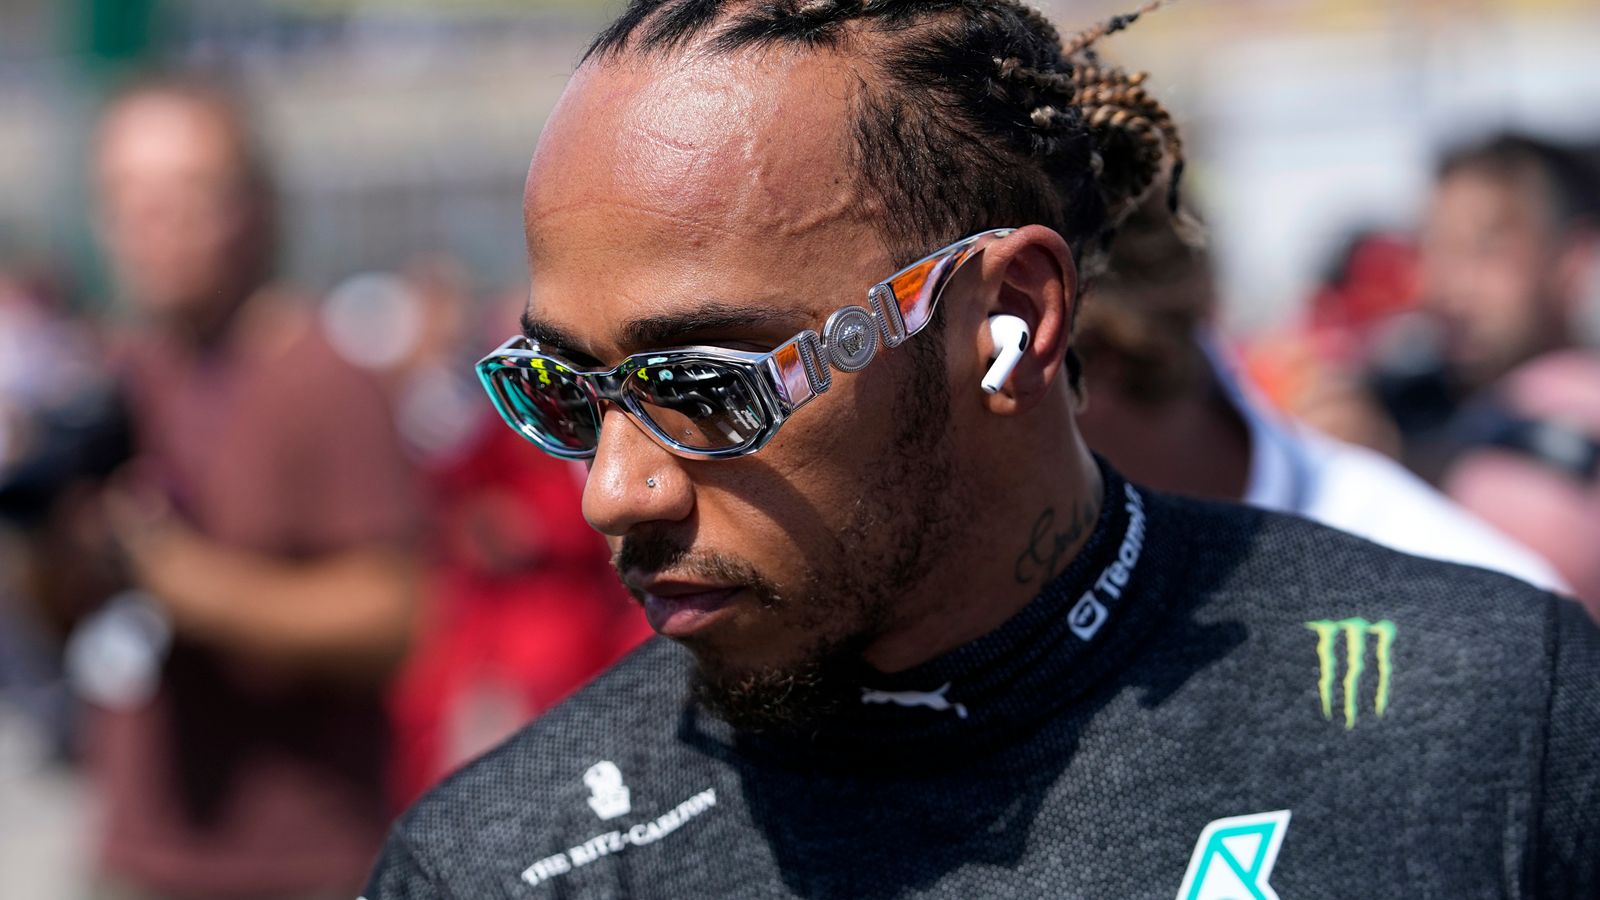 Hamilton disqualified from P2 in US GP after failed plank inspection